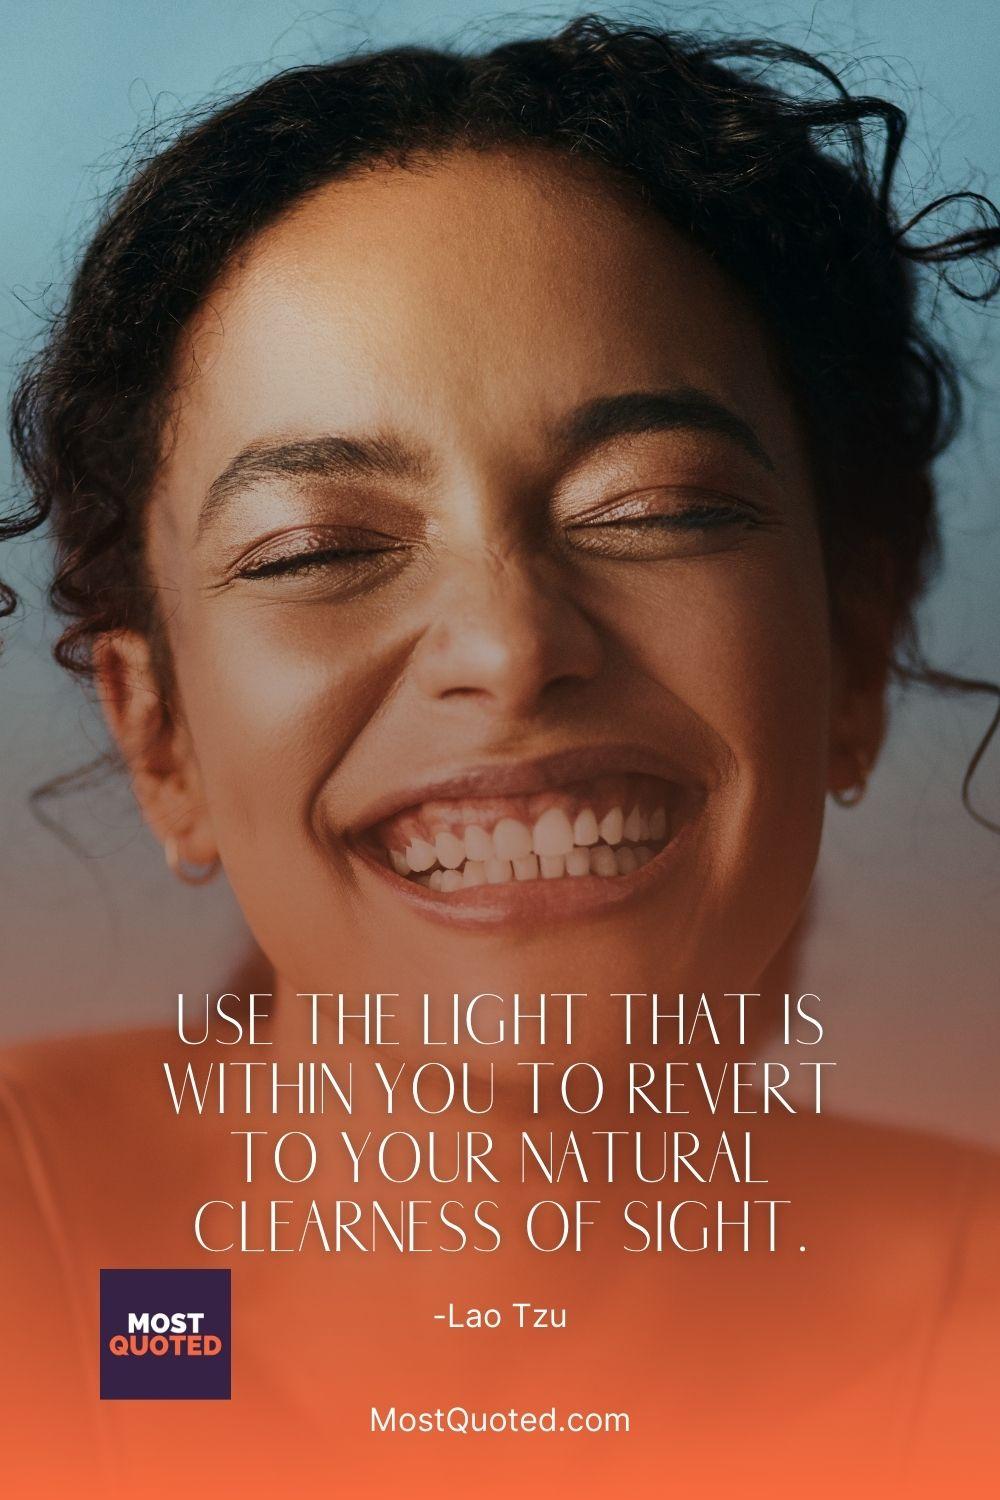 Use the light that is within you to revert to your natural clearness of sight. - Lao Tzu